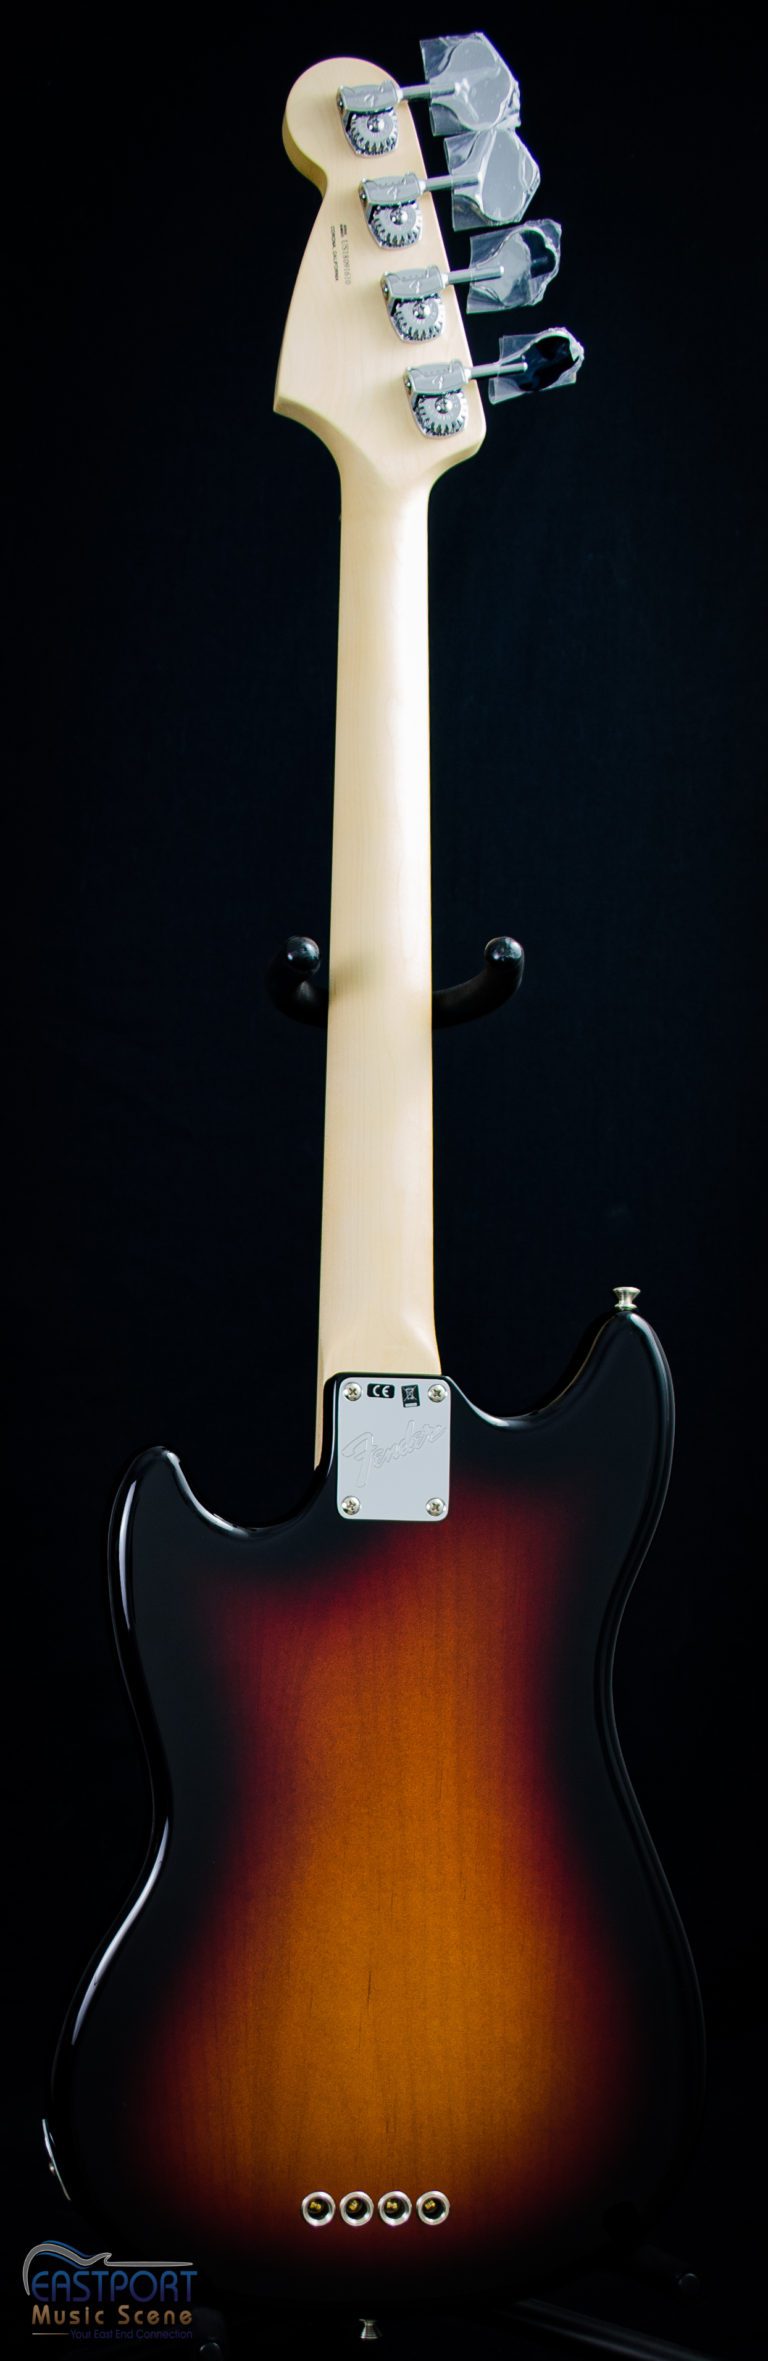 A guitar with the back of it turned to the side.